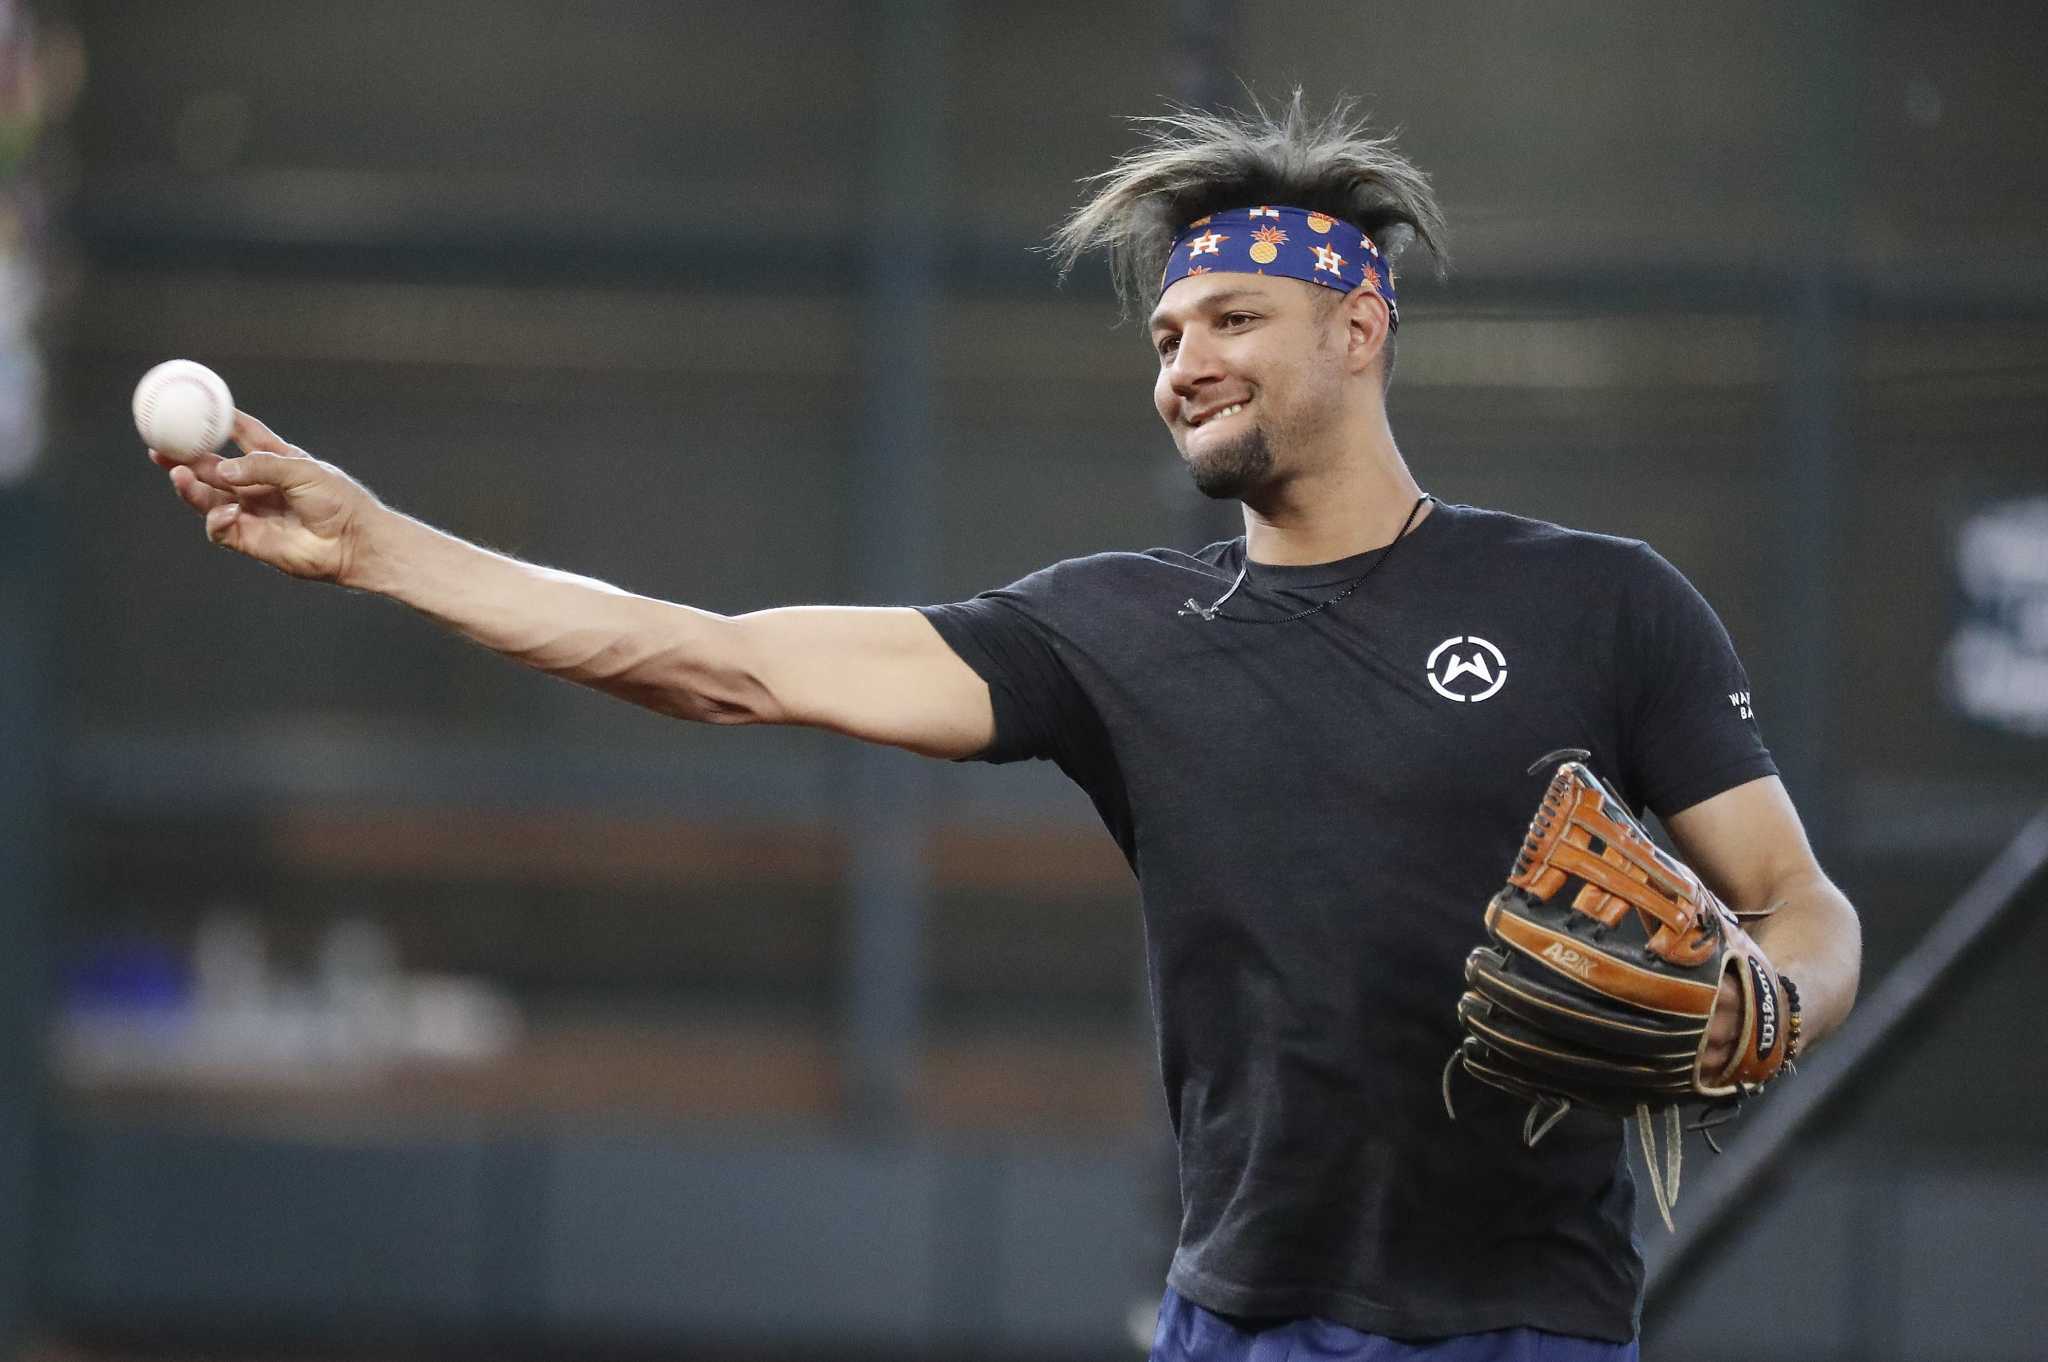 After worst year of his career, batting champ Yuli Gurriel primed for World  Series run at age 37